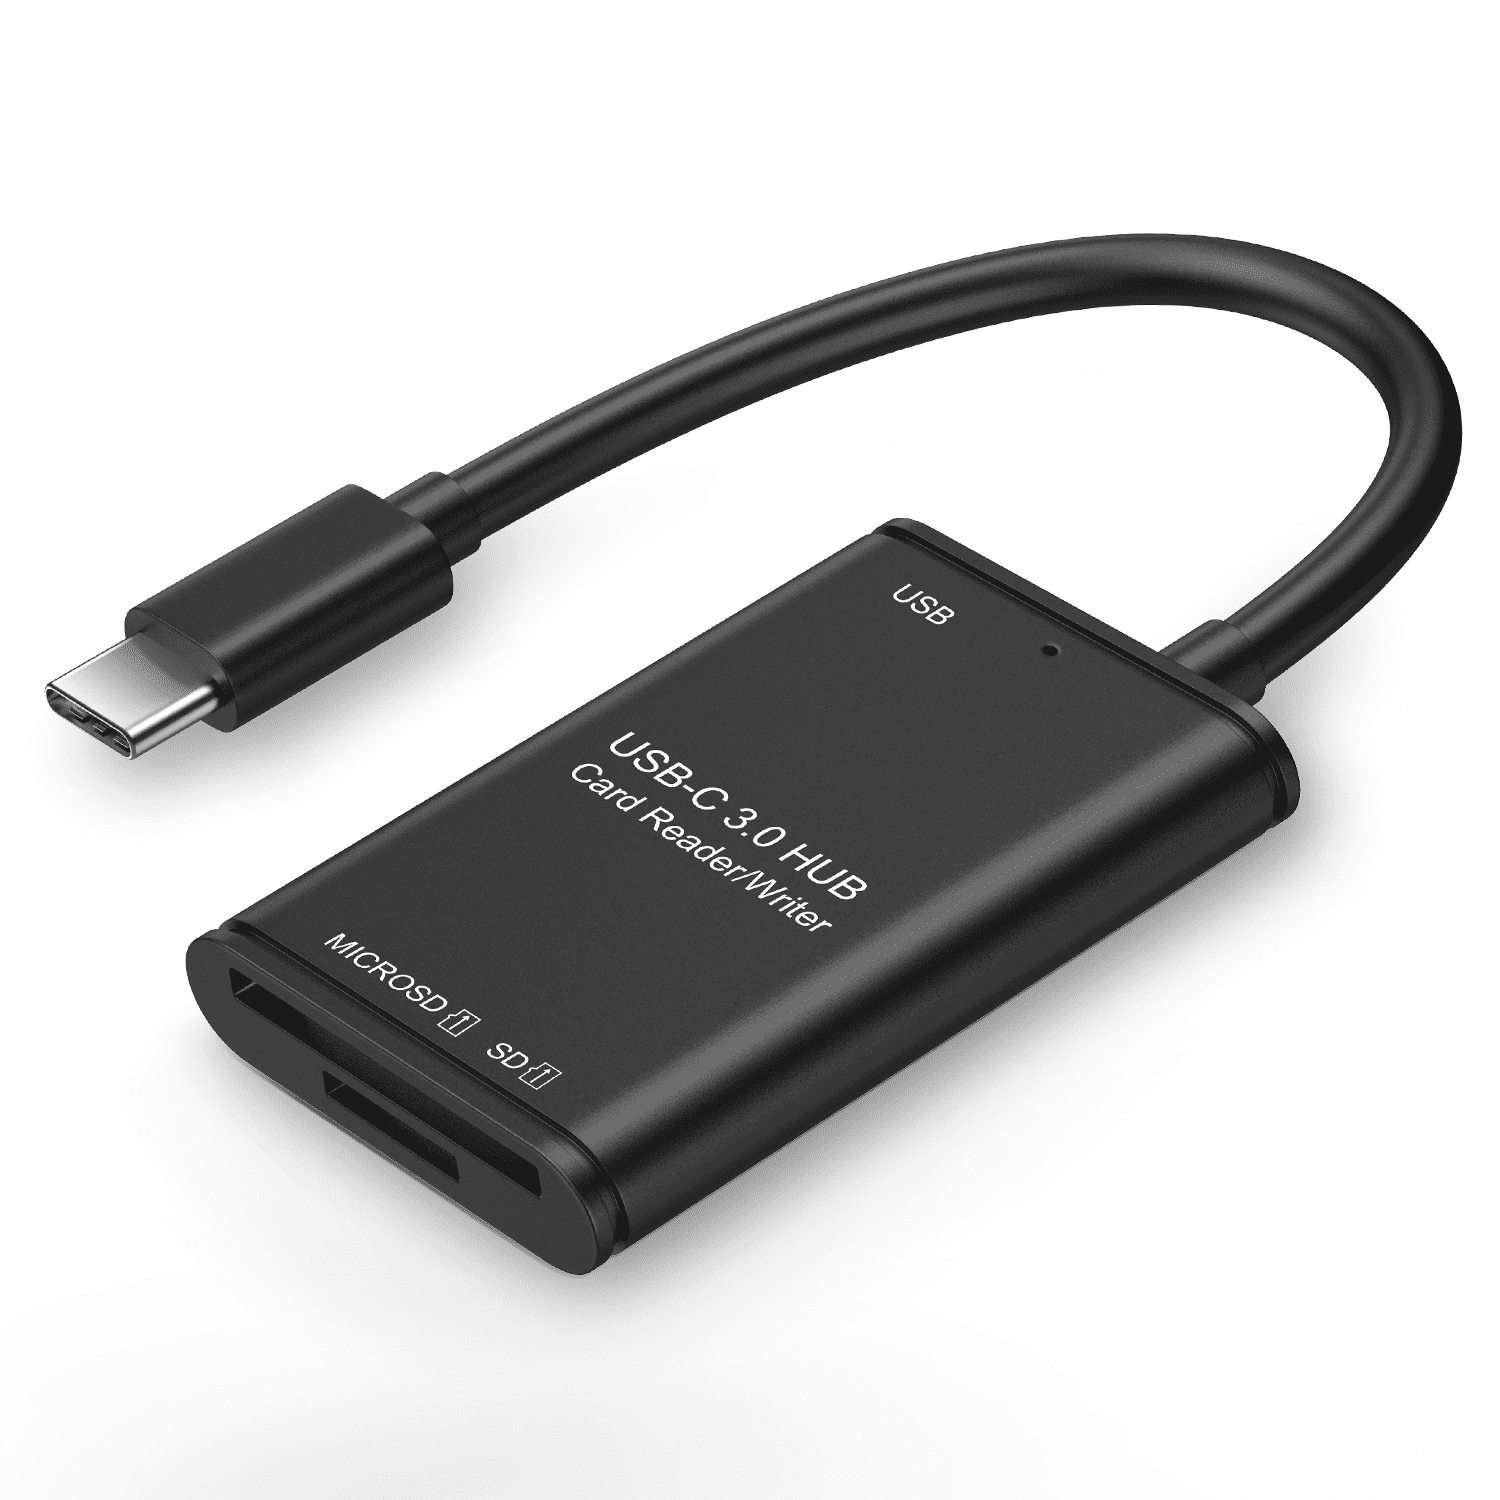 Garmin USB Card Reader with USB-C Adapter Cable